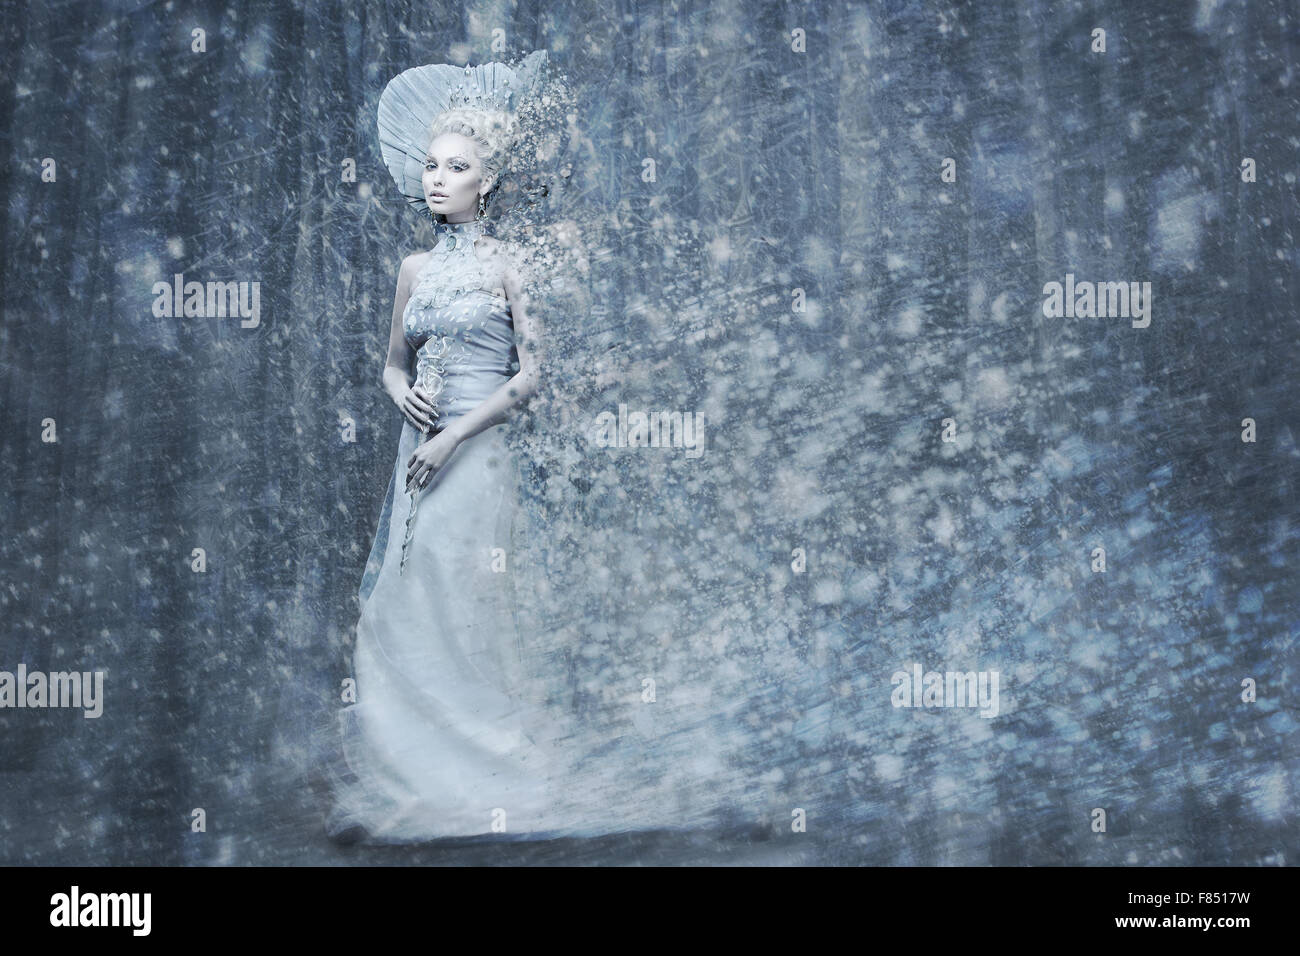 Fairy tale snow queen in magic forrest Stock Photo